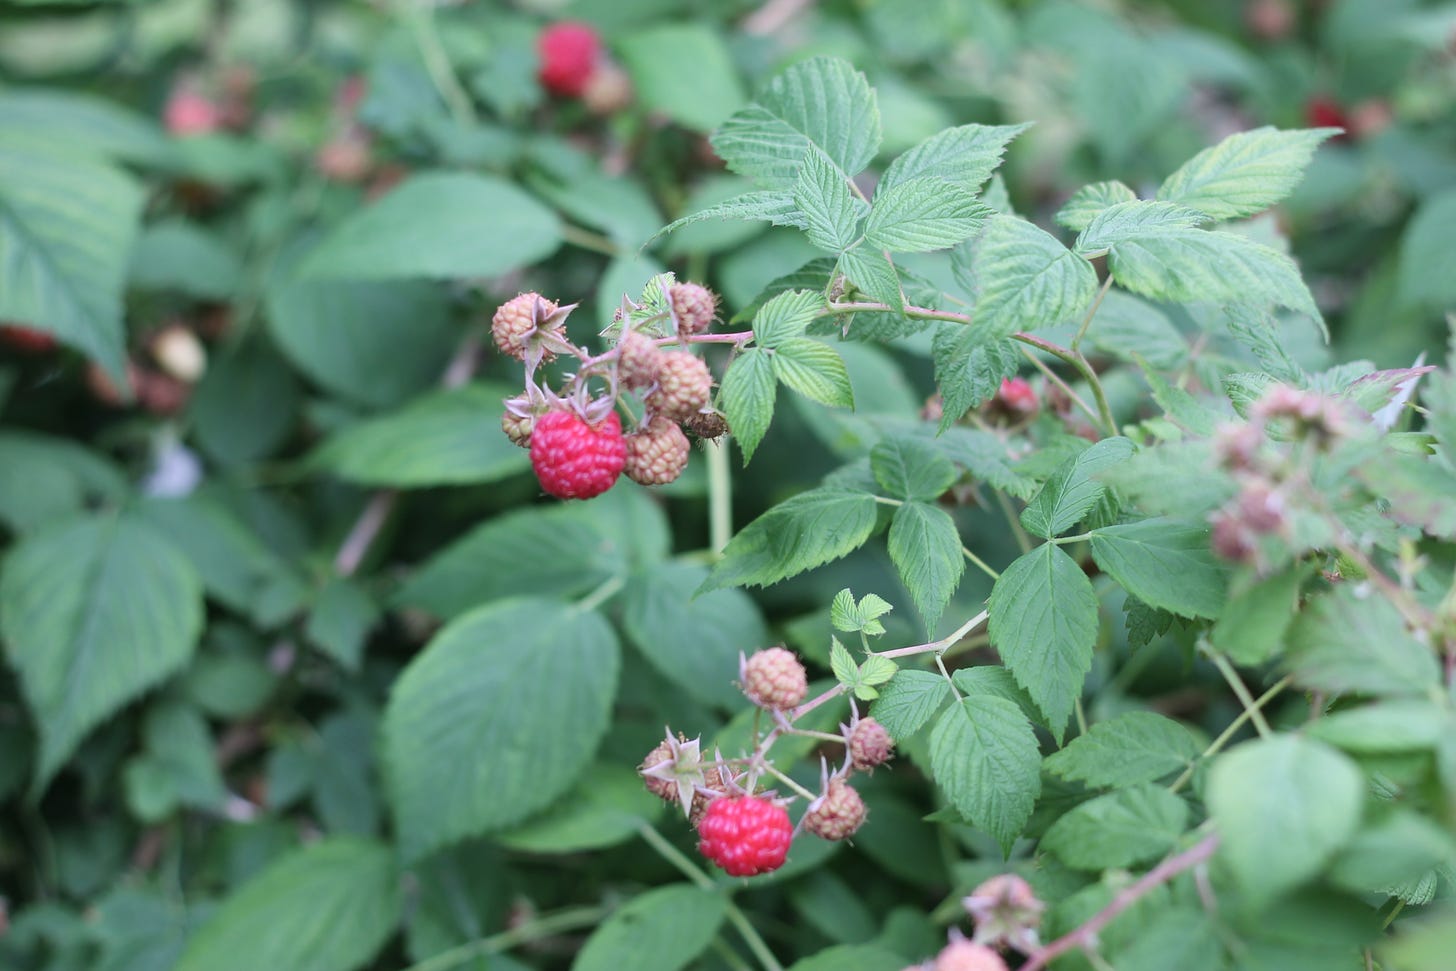 Raspberries on a branch, some red and ripe, others smaller and pale pink